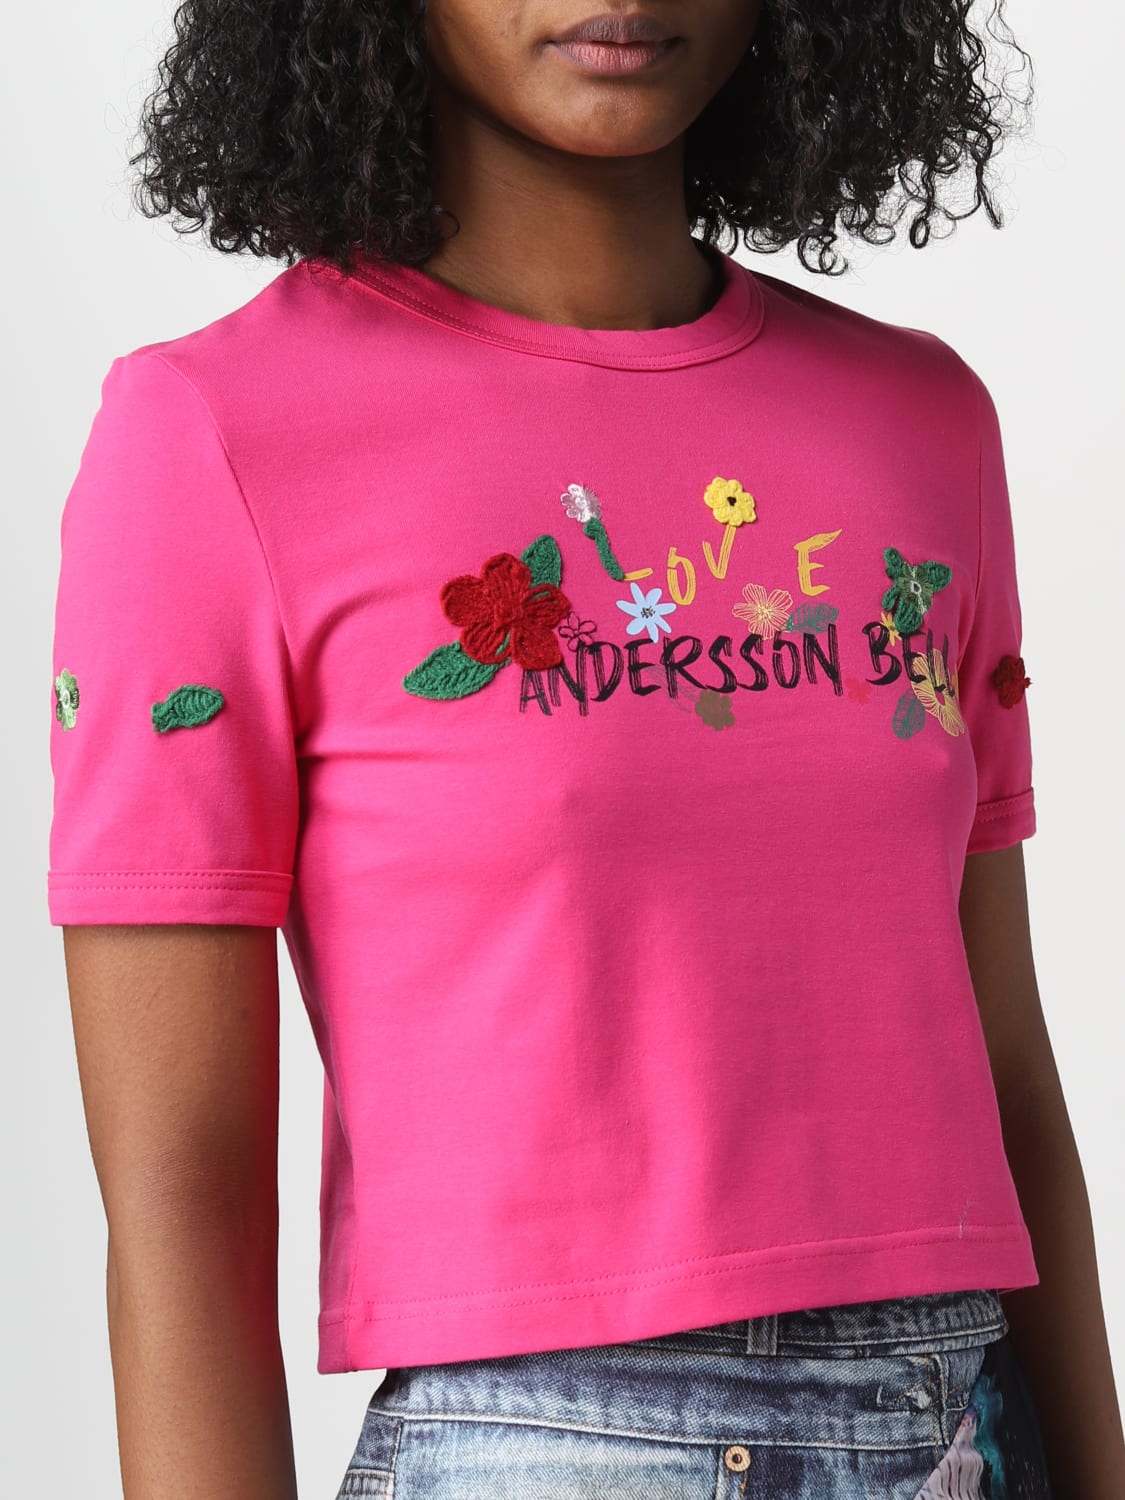 ANDERSSON BELL: t-shirt for woman - Pink | Andersson Bell t-shirt ...